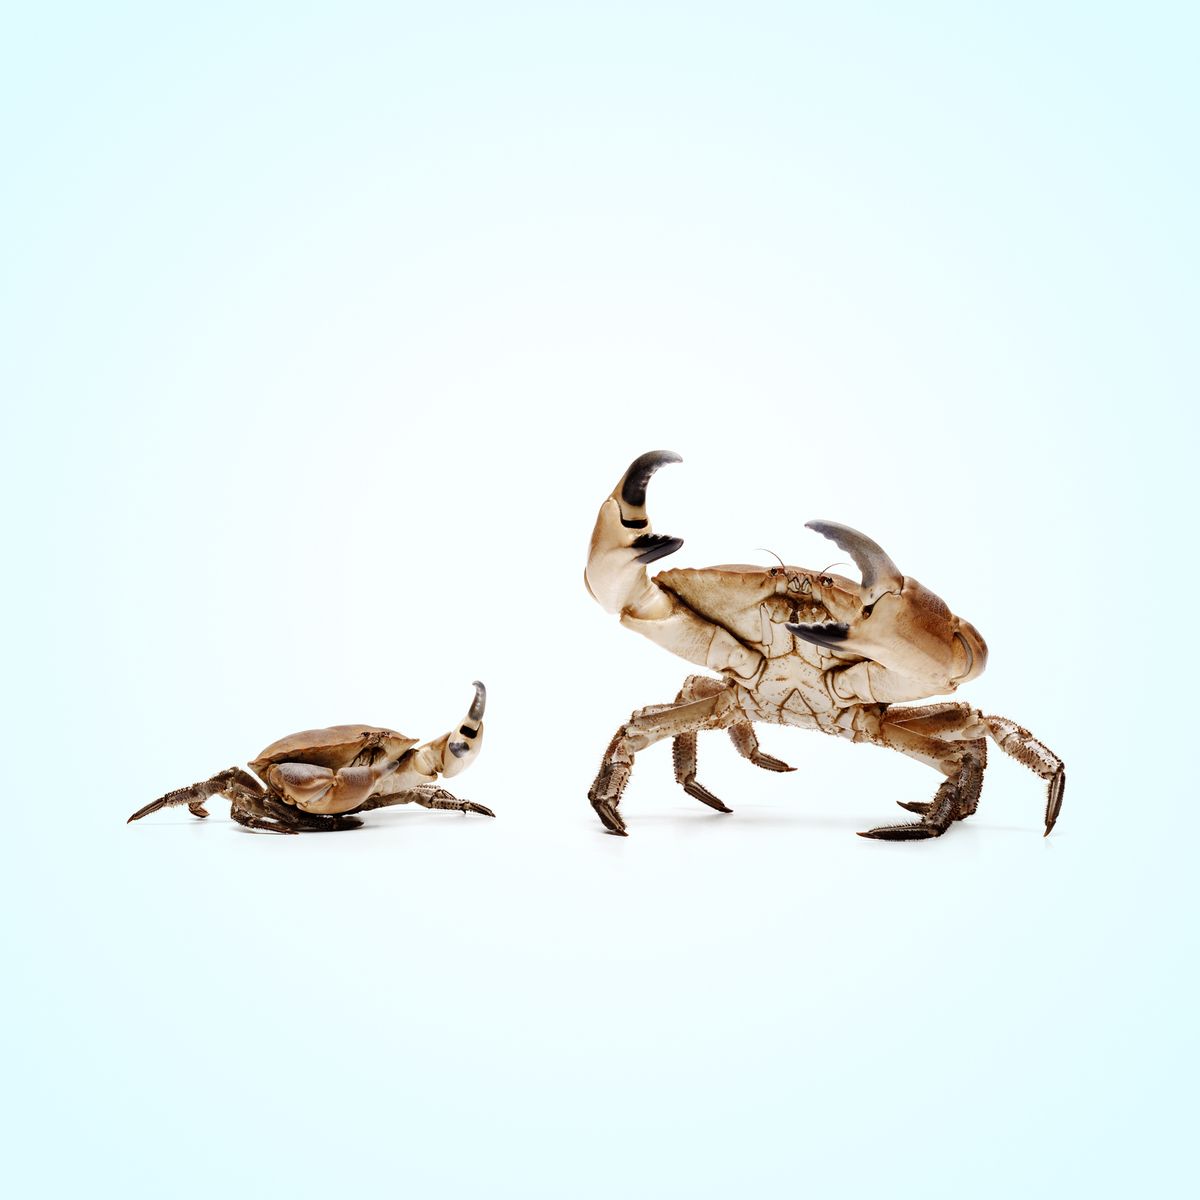 Crabs and Convergent Evolution: Carcinization Explained